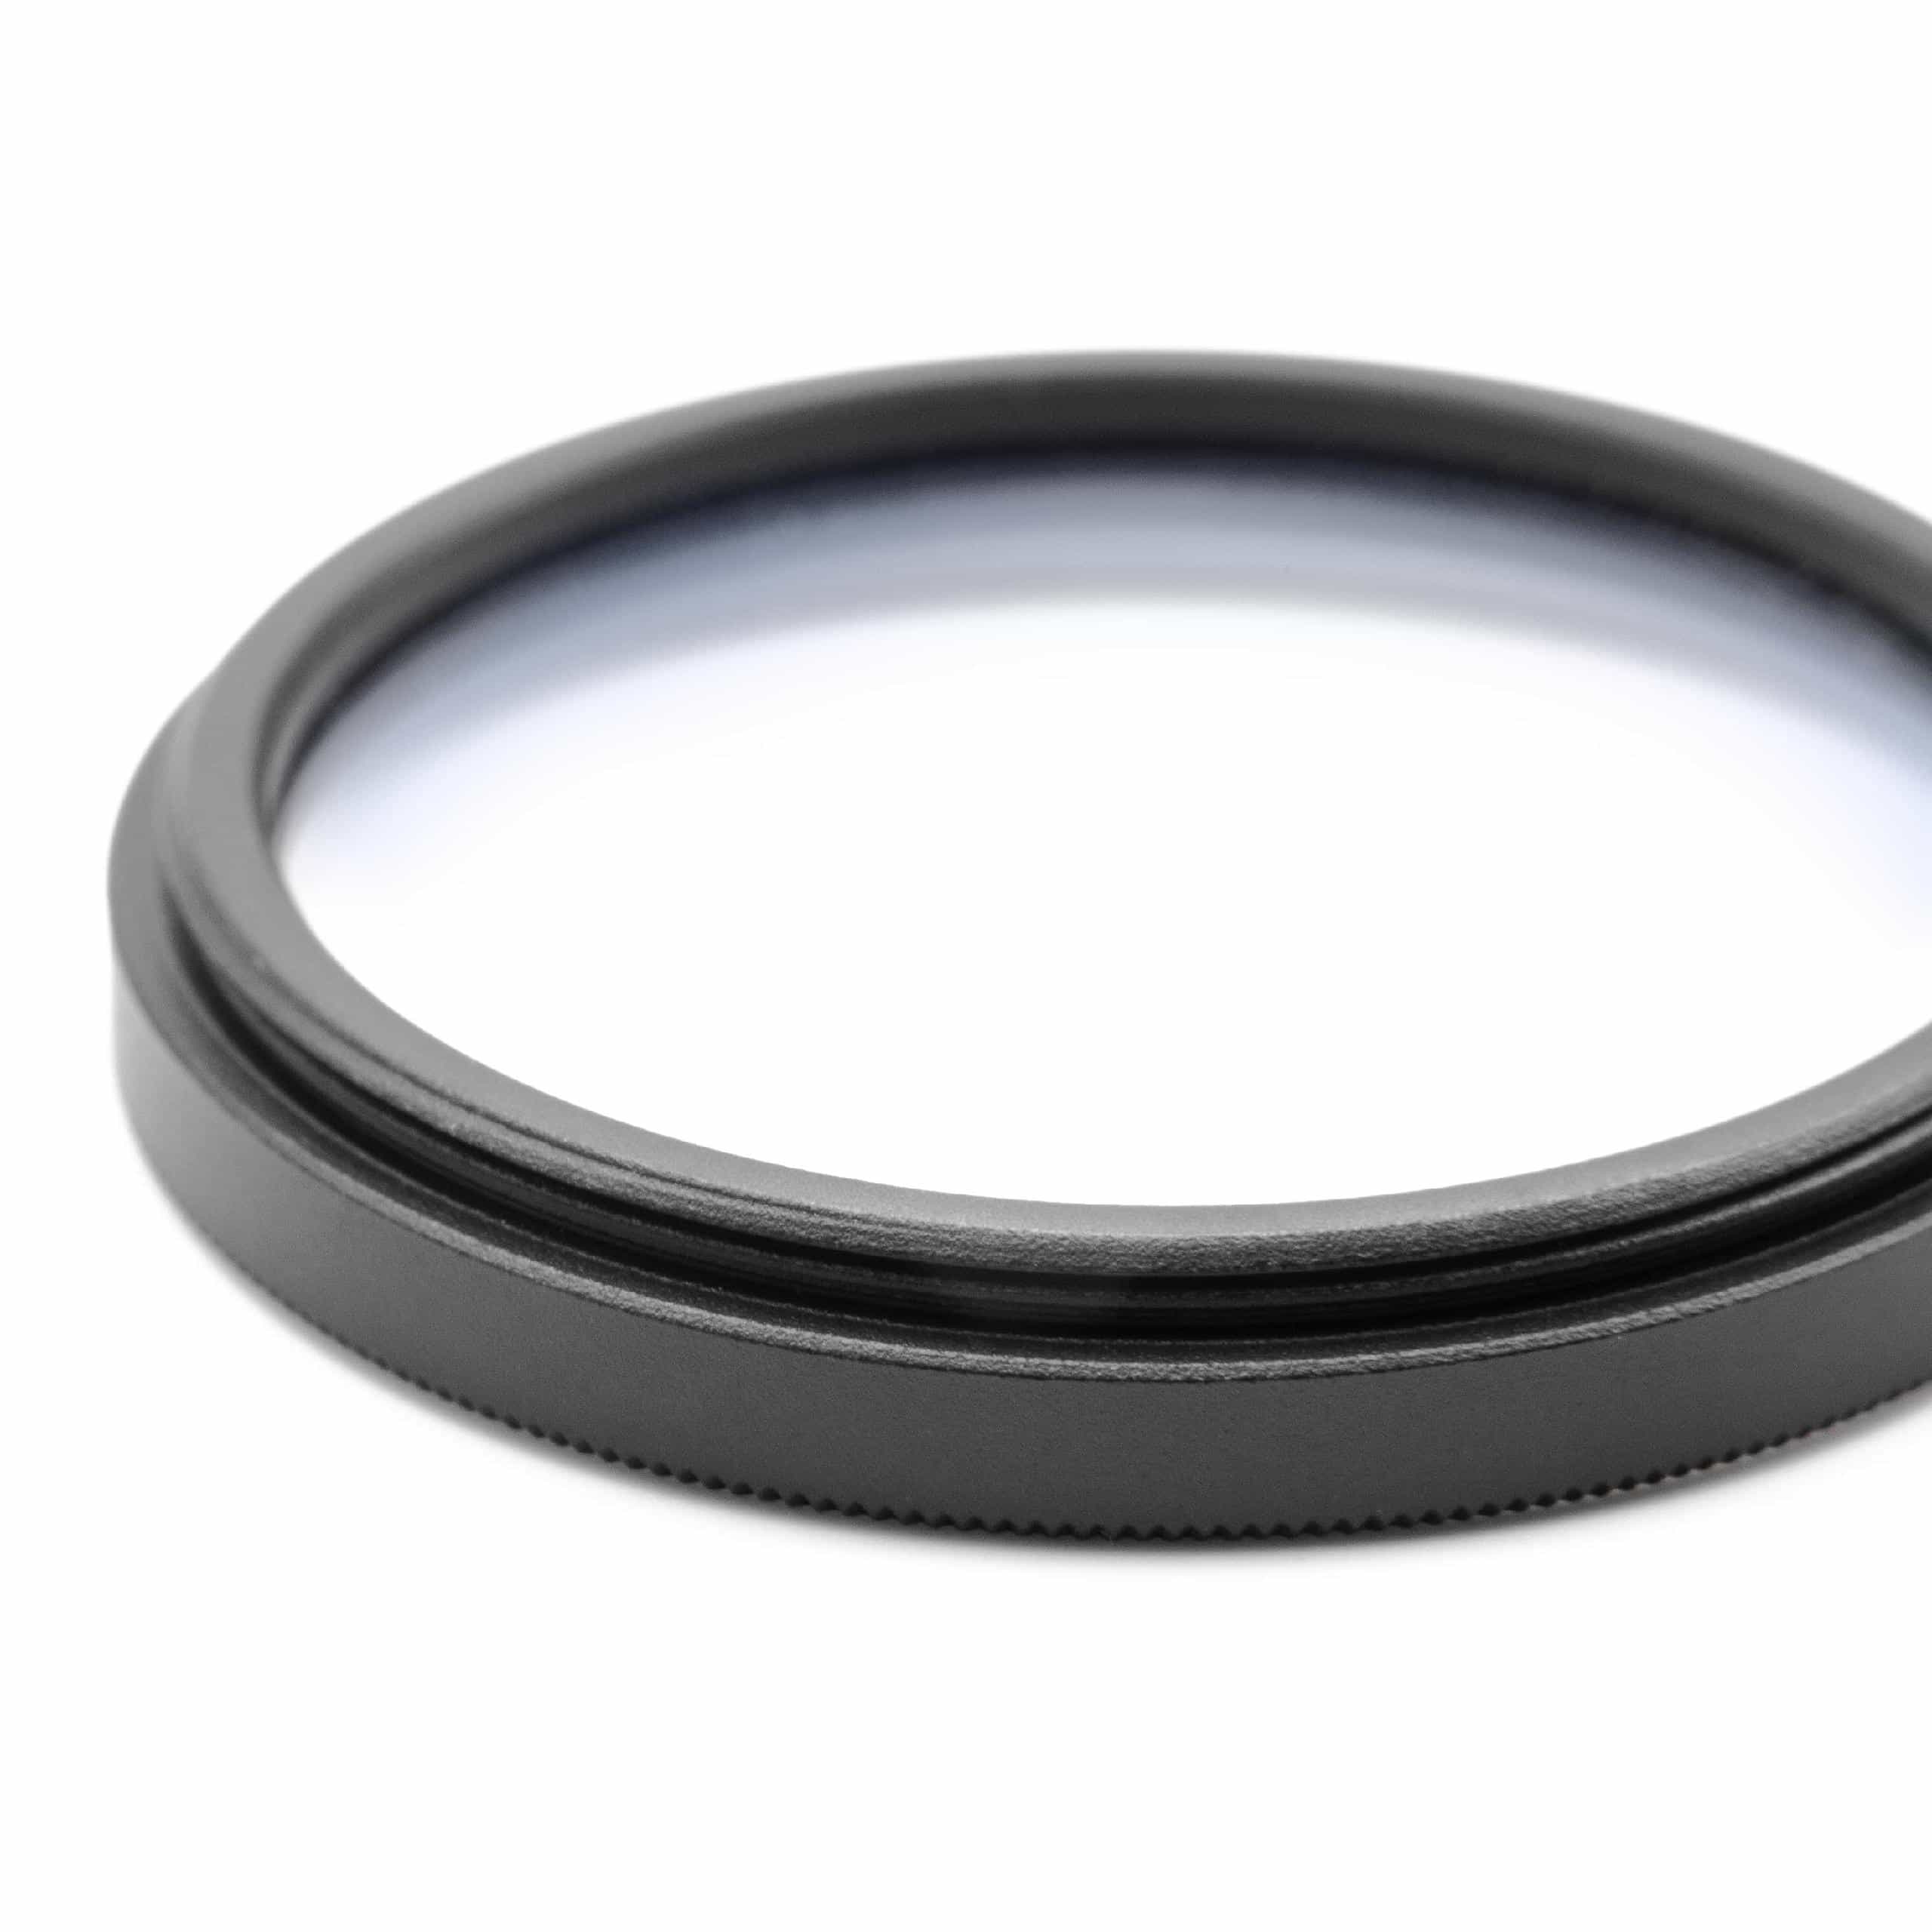 Soft Focus Filter suitable for Cameras & Lenses with 43 mm Filter Thread - Soft Filter